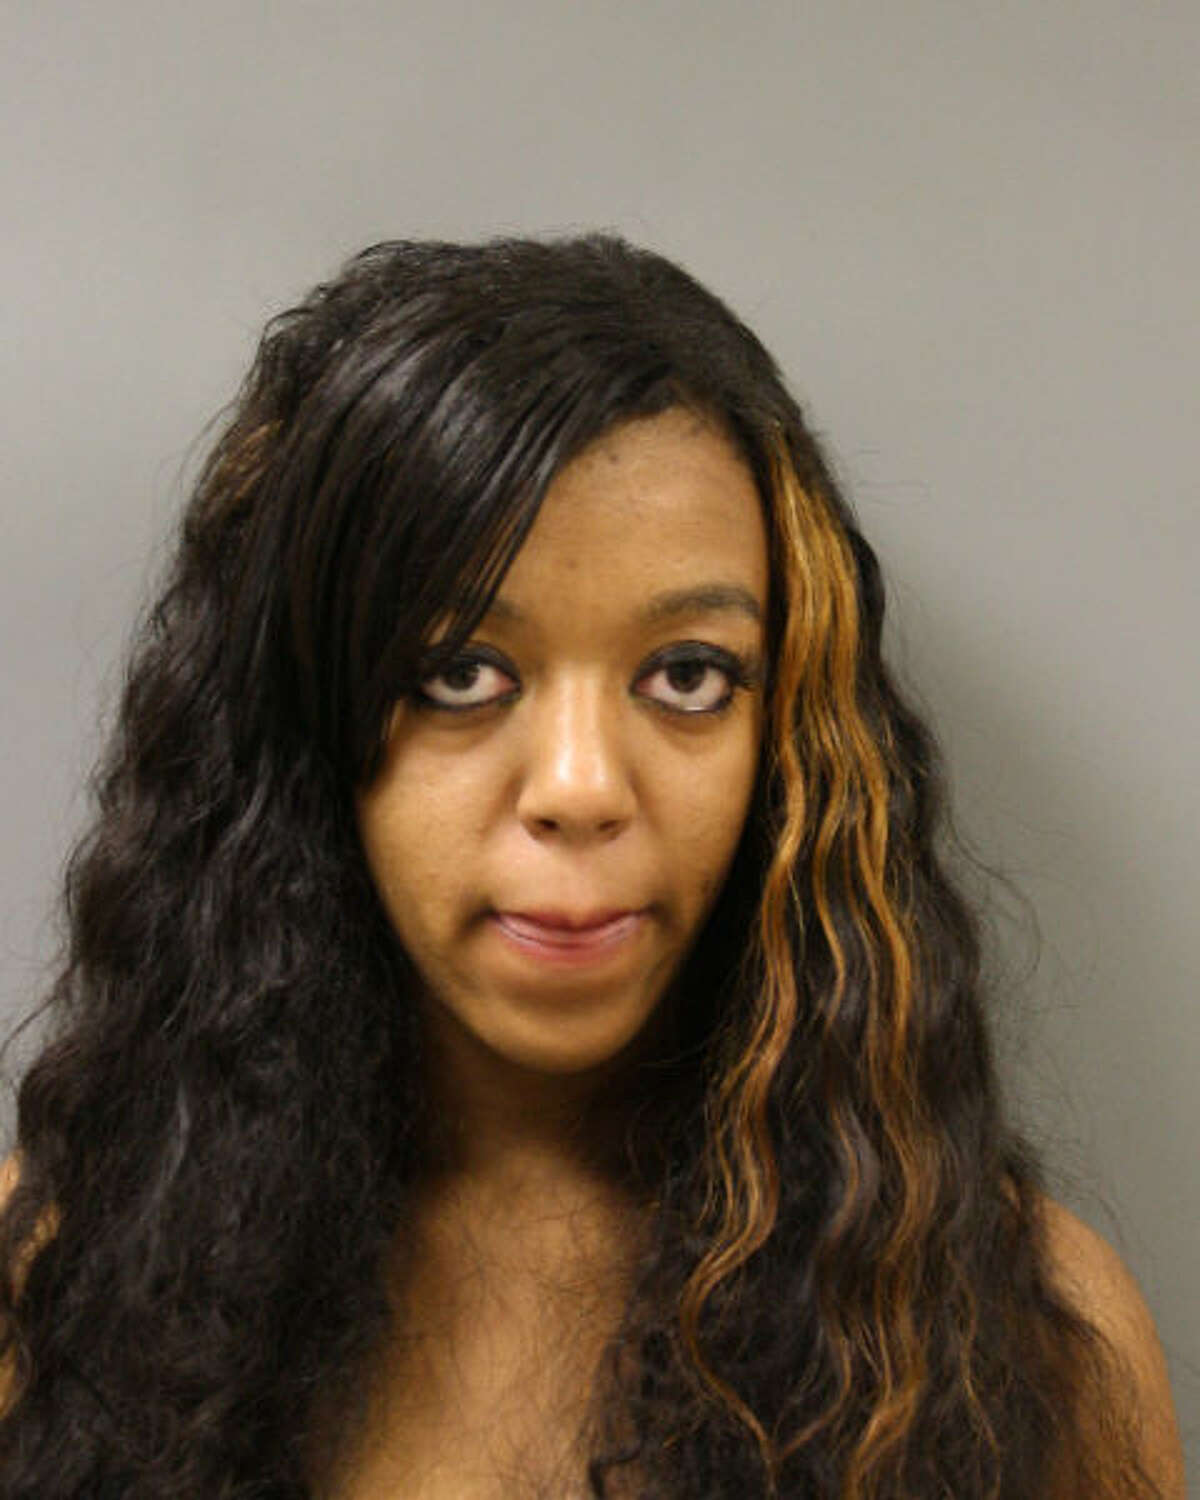 Mariah Lynn Applewhite. Date of birth - 03/03/93. Charge #1 SOB Violation - Operating as a Class II Enterprise without a permit.